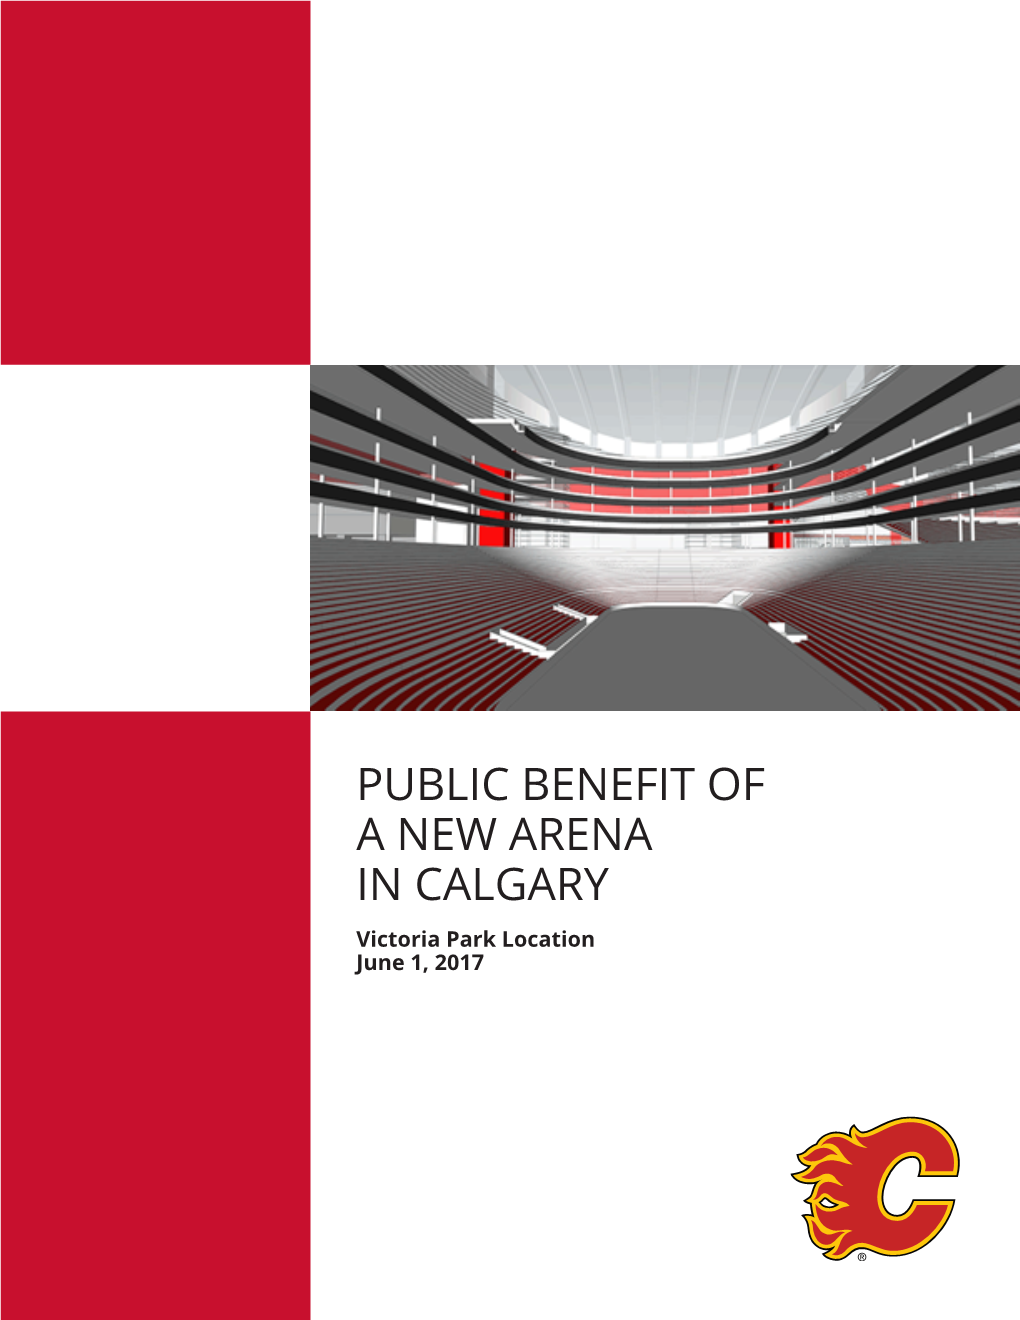 PUBLIC BENEFIT of a NEW ARENA in CALGARY Victoria Park Location June 1, 2017 PUBLIC BENEFIT of a NEW ARENA in CALGARY Victoria Park Location, June 1, 2017